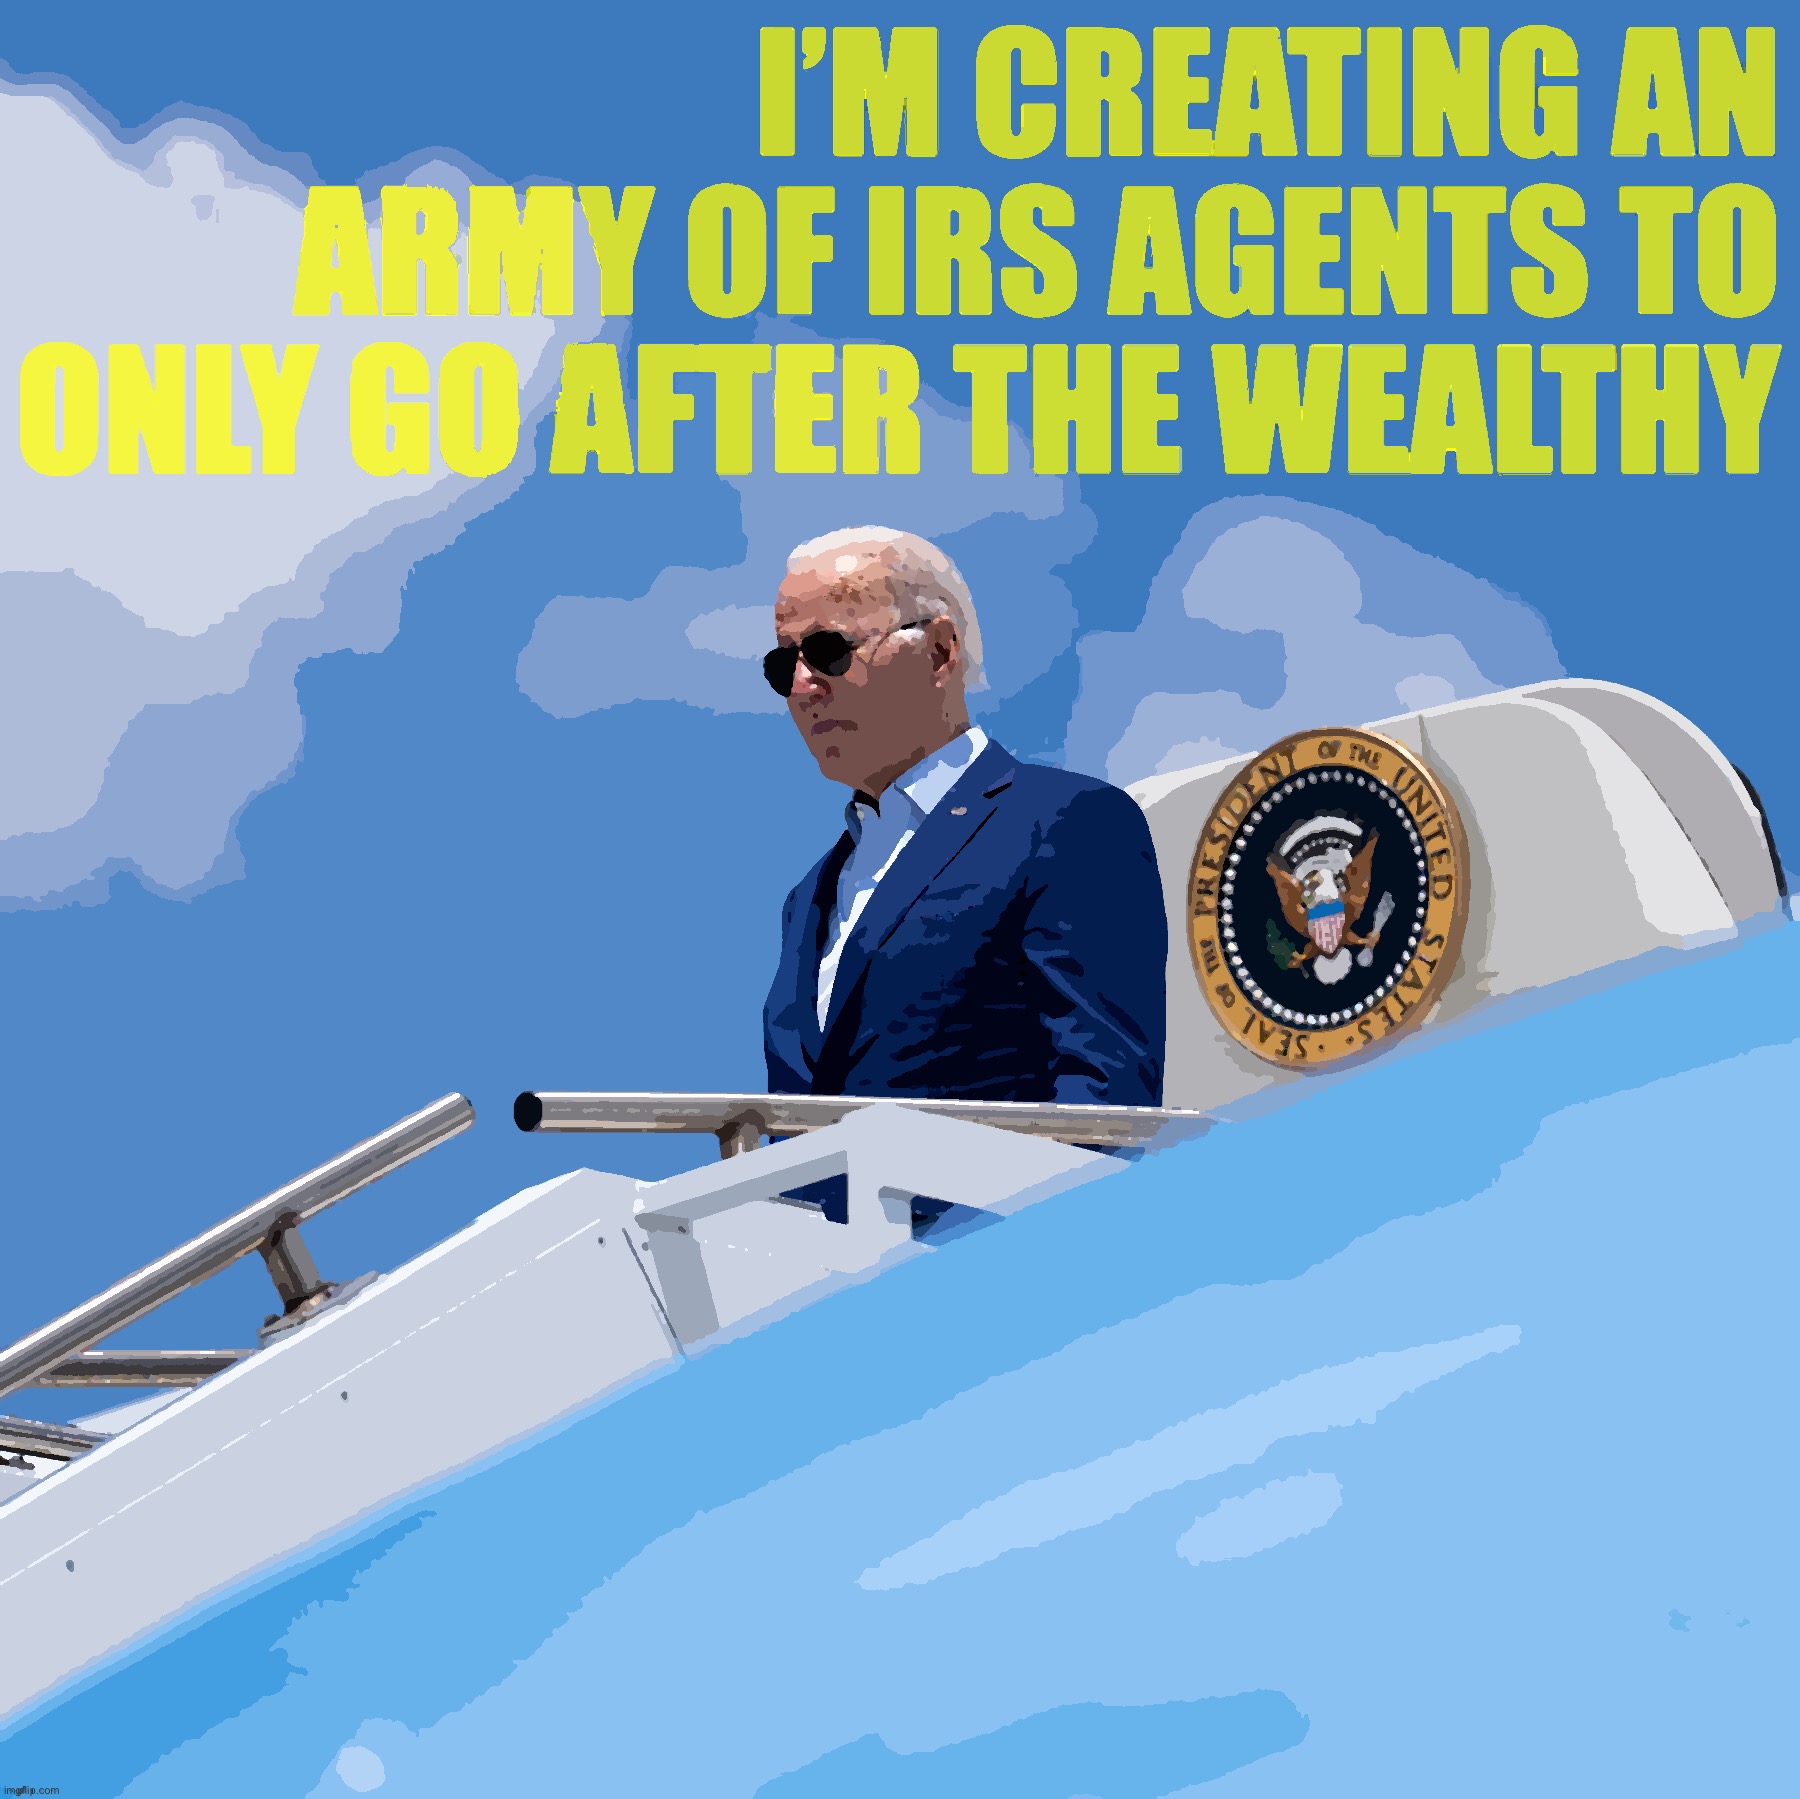 Biden army of IRS agents | image tagged in biden army of irs agents | made w/ Imgflip meme maker